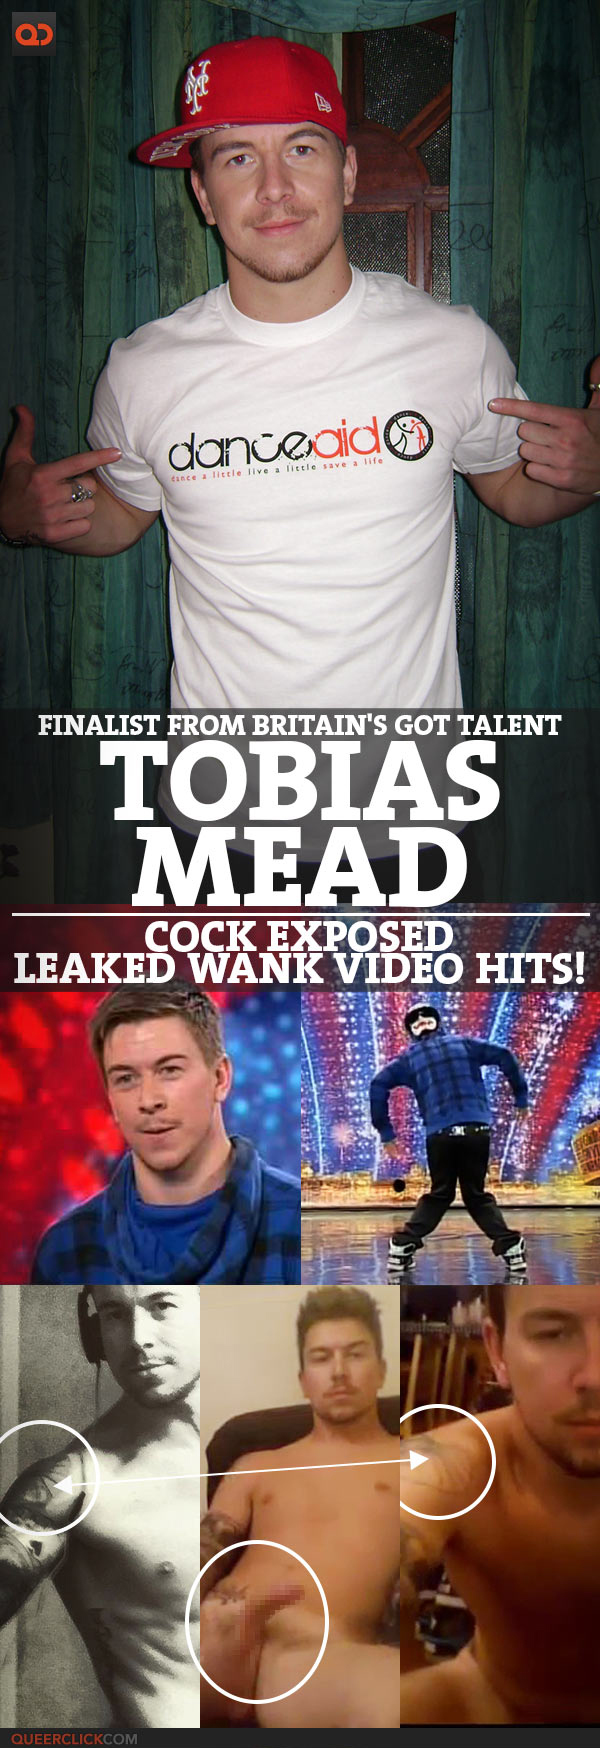 Tobias Mead, Finalist From Britain's Got Talent, Cock Exposed - Leaked Wank Video Hits!